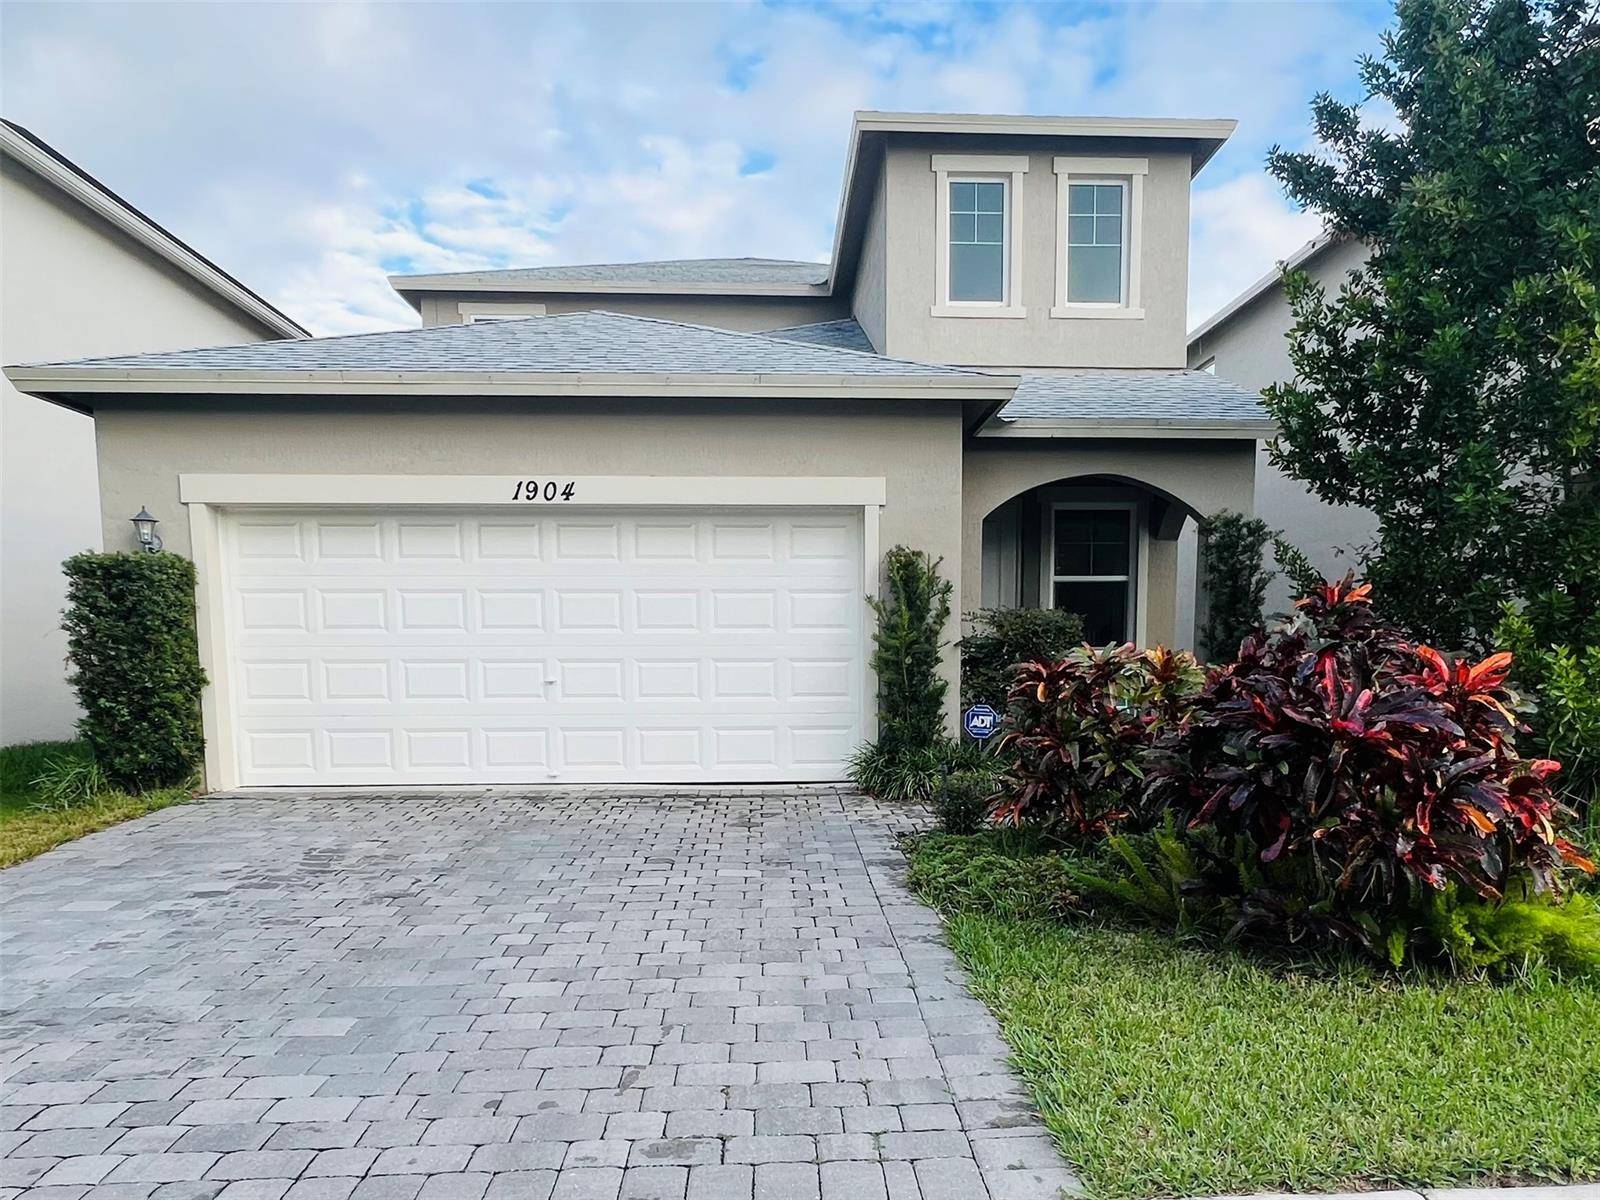 This beautiful 4 bedroom Lake Worth Beach home is just 4 years old and offers a tranquil lake view with a fountain, open floor plan, modern kitchen with spacious work ...